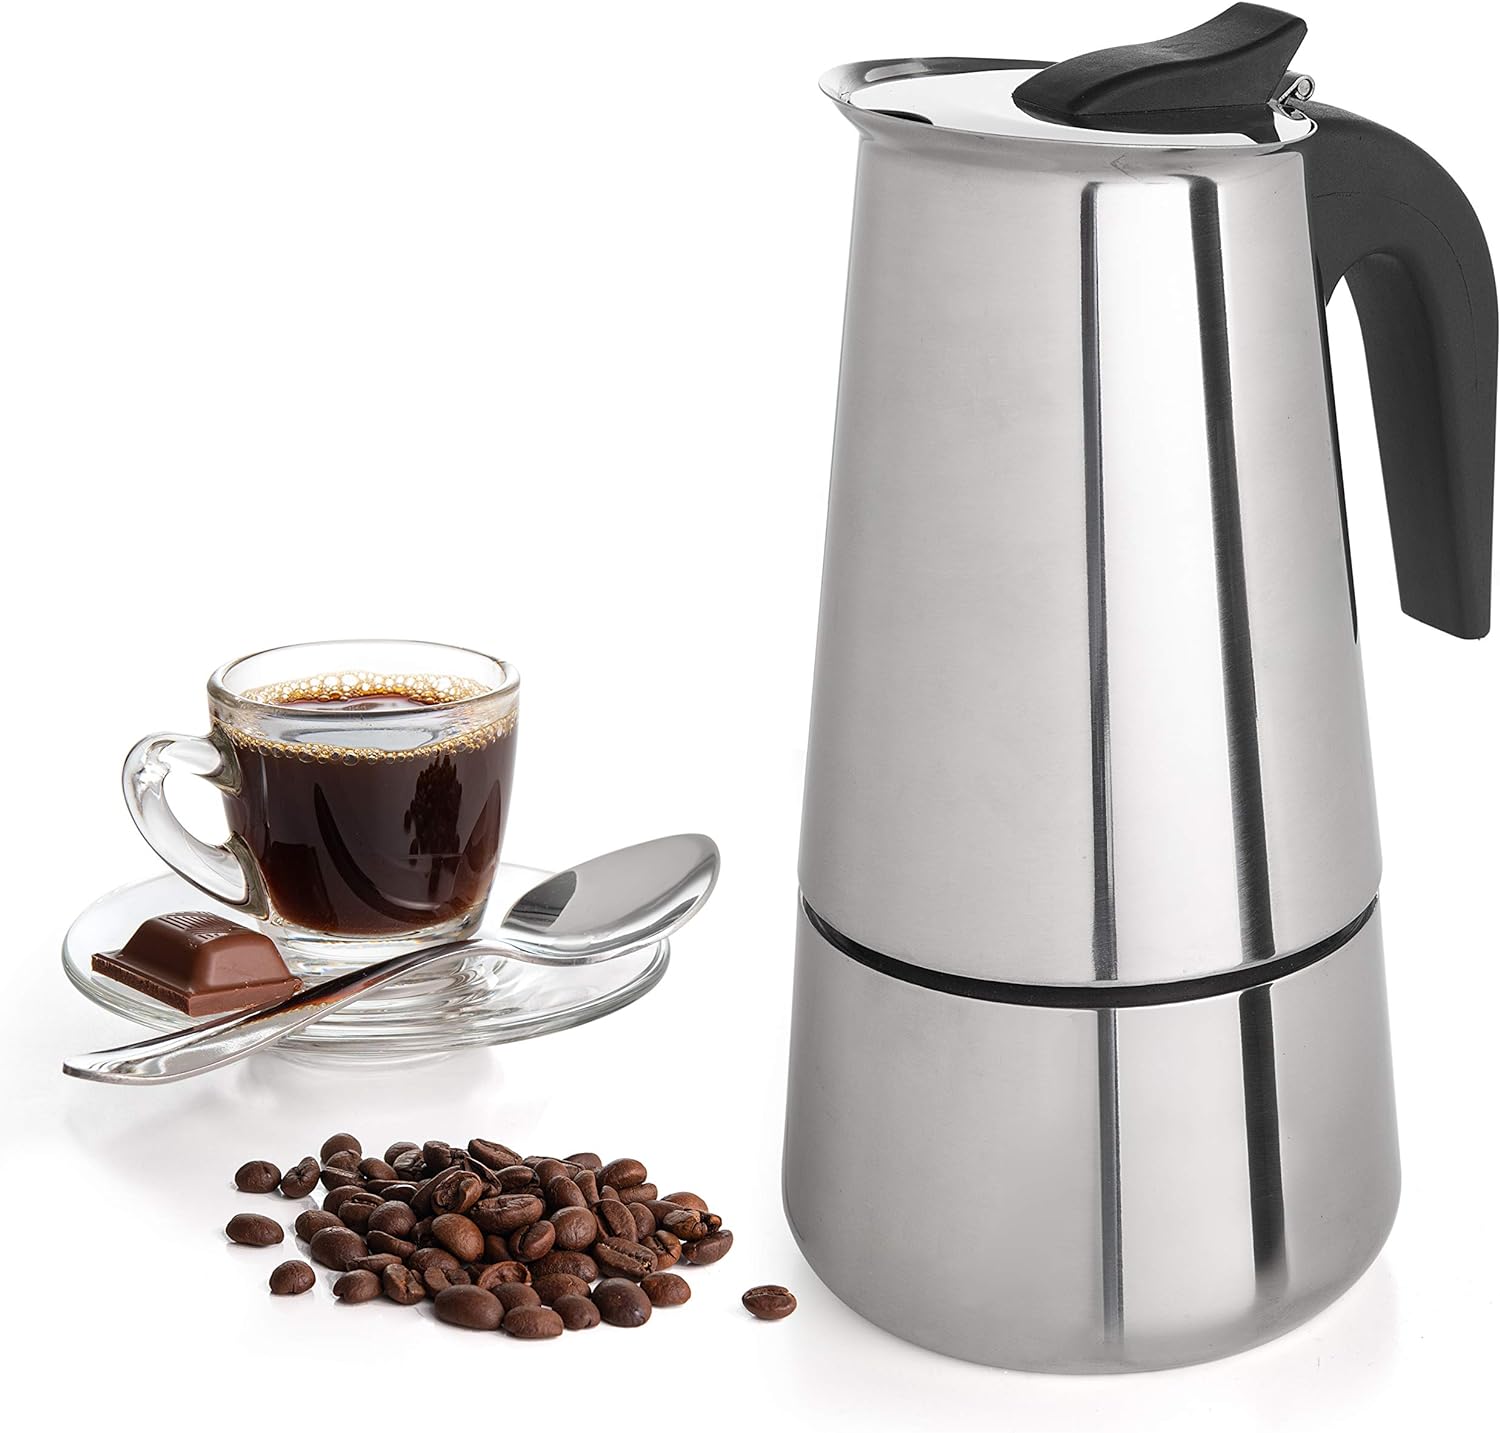 This is a great quality stainless steel coffee brewer and espresso maker. Its not one of those cheap aluminum ones that can get damaged easily. Its a good size for making 2 regular cups of coffee yet small enough to carry around for travel and very easy to clean. I highly recommend it.